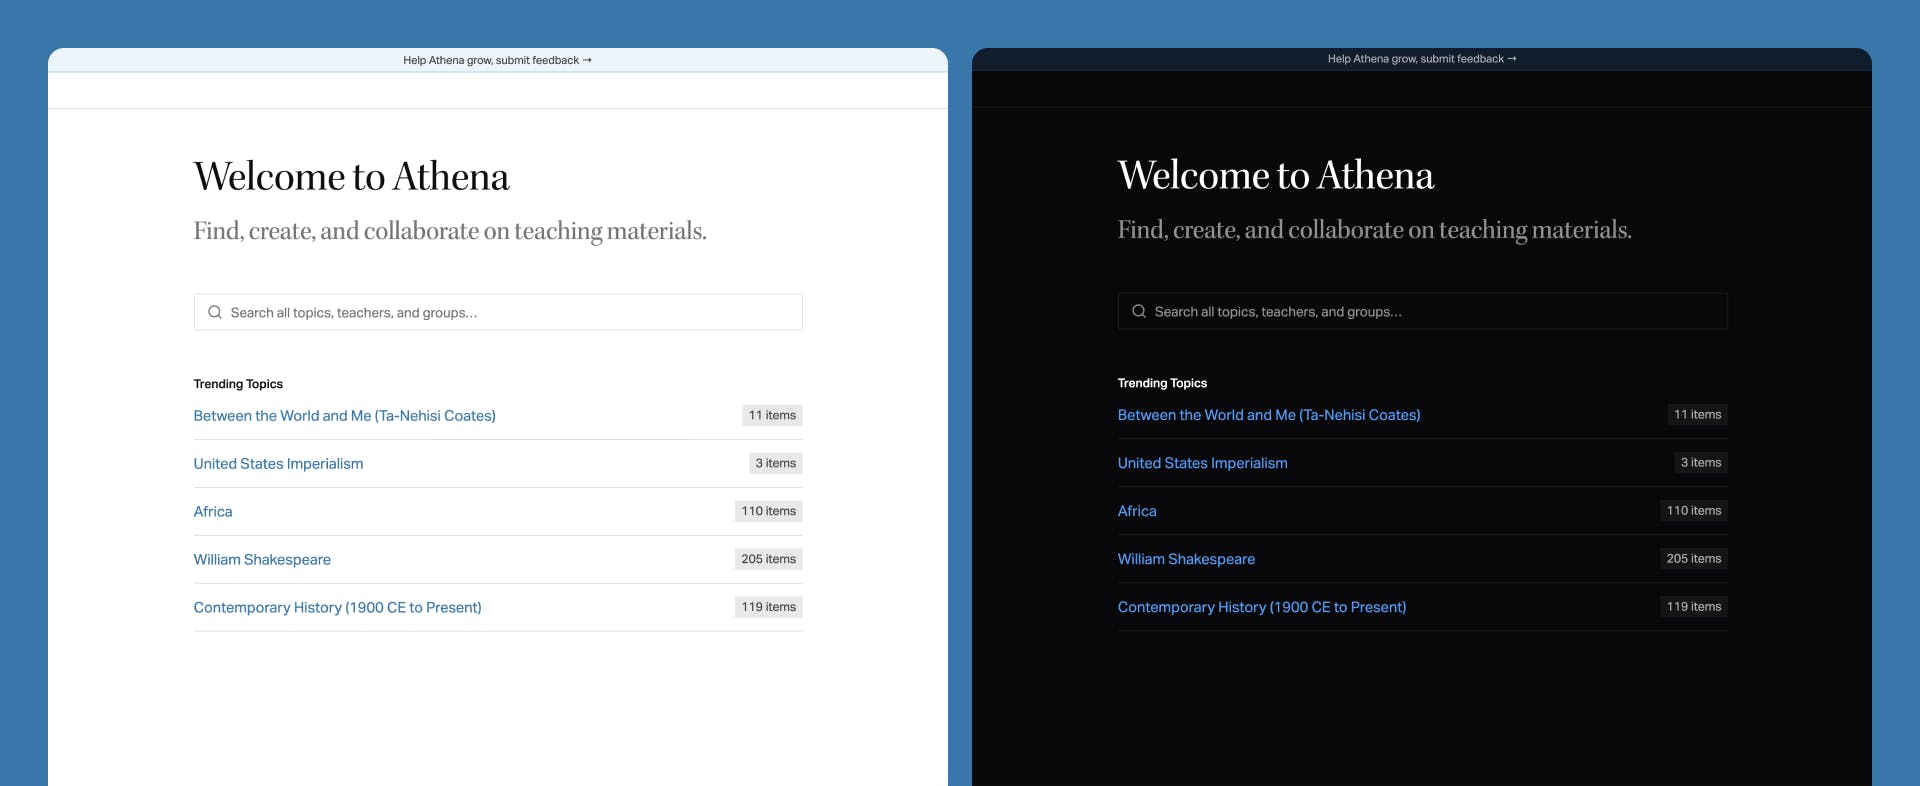 Two screenshots of the Athena homepage, one in the light theme and one in the dark theme.